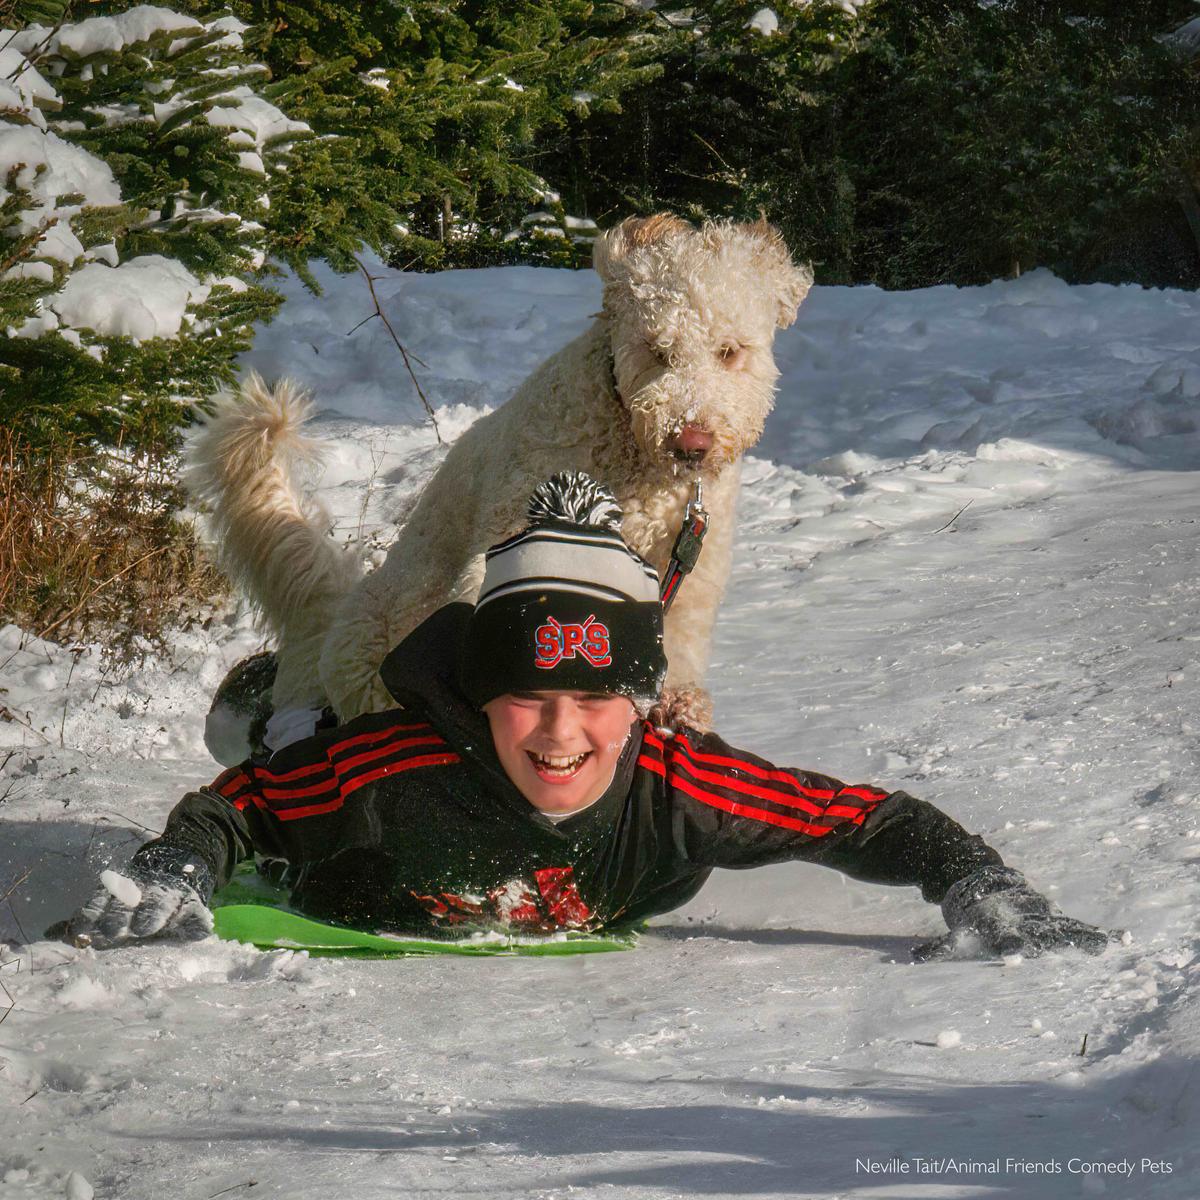 "While we were in Canada over Christmas it snowed quite heavily. Our Grandson' Bowen's dog, Oscar, loved running around in the snow and when Bowen jumped on a piece of plastic to slide down the hill, Oscar bounded after him and jumped on his back." (Courtesy of Neville Tait/<a href="https://www.facebook.com/AnimalFriendsPetInsurance">Animal Friends Comedy Pets</a>)